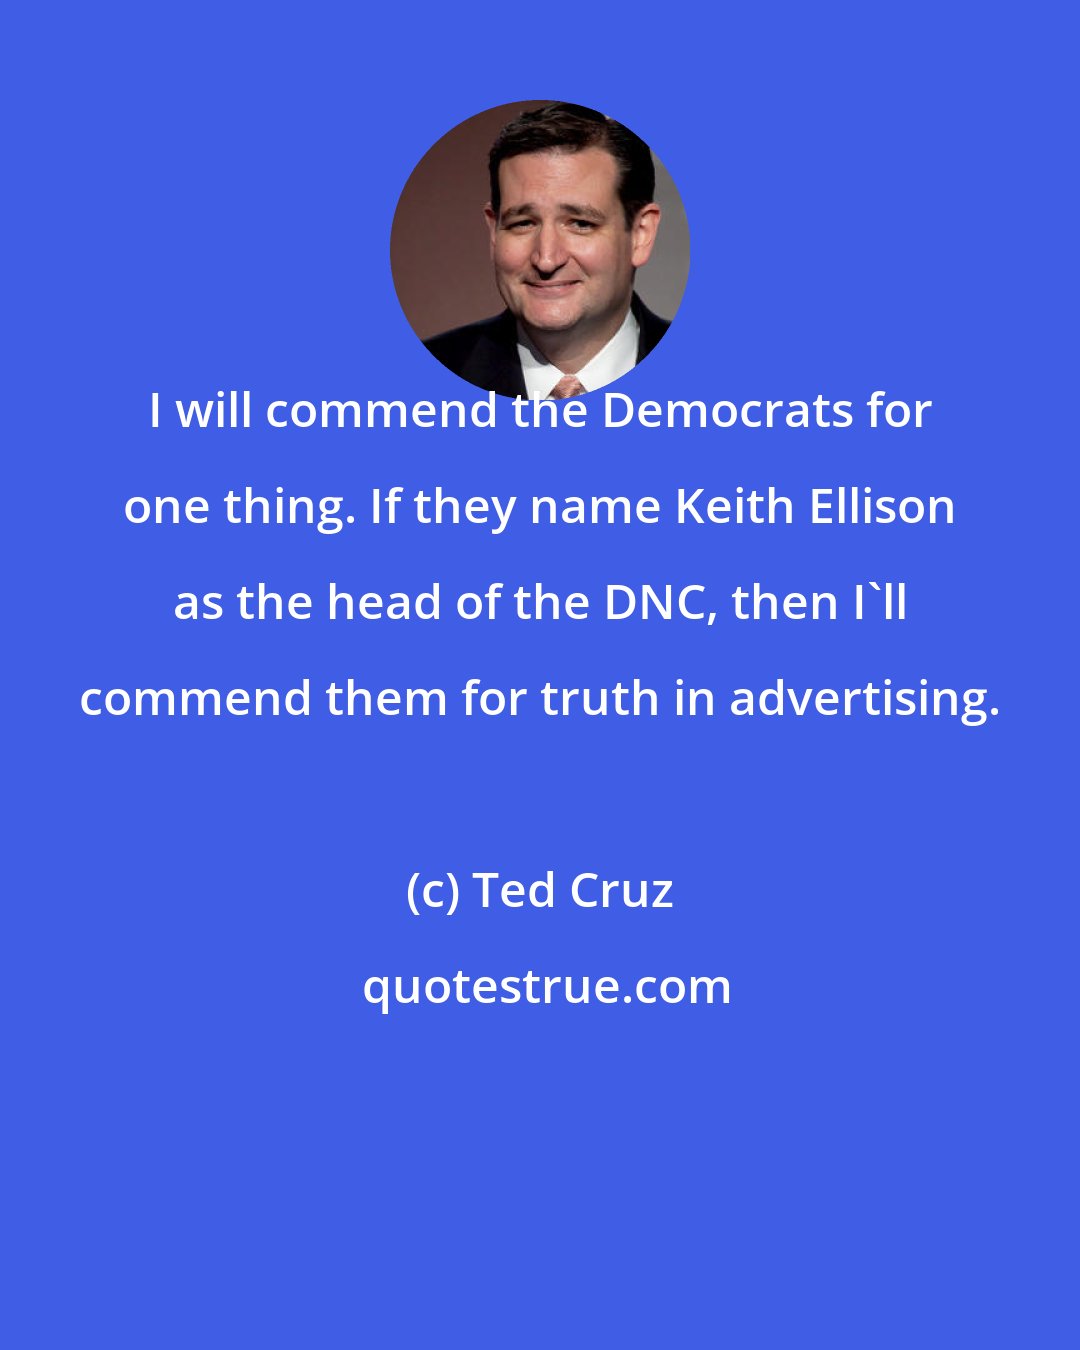 Ted Cruz: I will commend the Democrats for one thing. If they name Keith Ellison as the head of the DNC, then I'll commend them for truth in advertising.